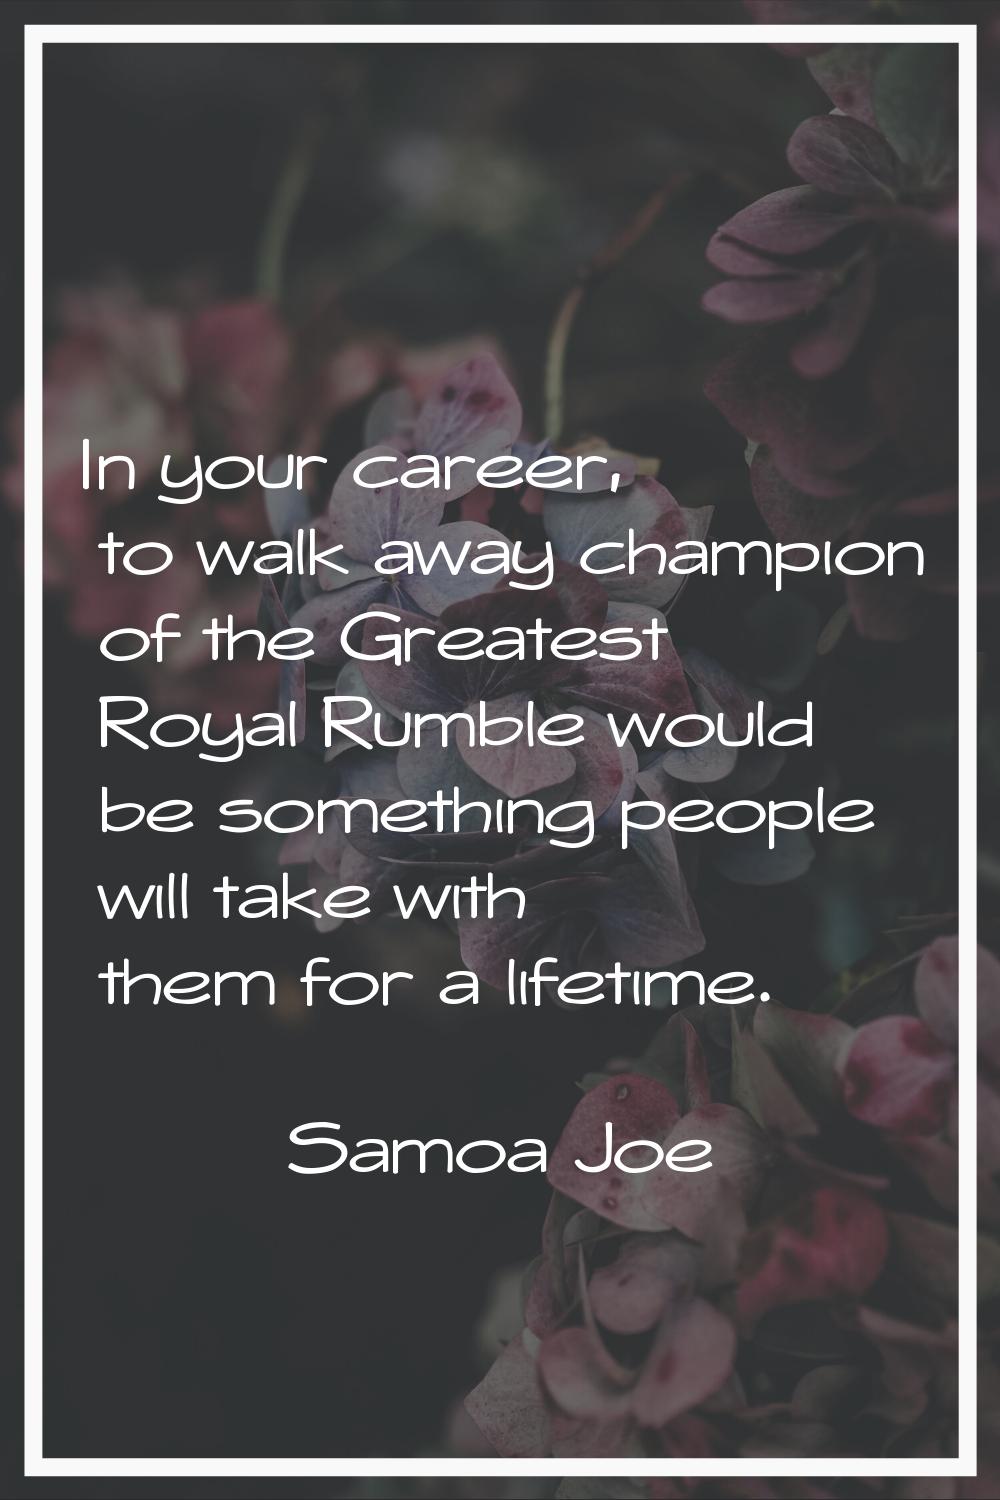 In your career, to walk away champion of the Greatest Royal Rumble would be something people will t